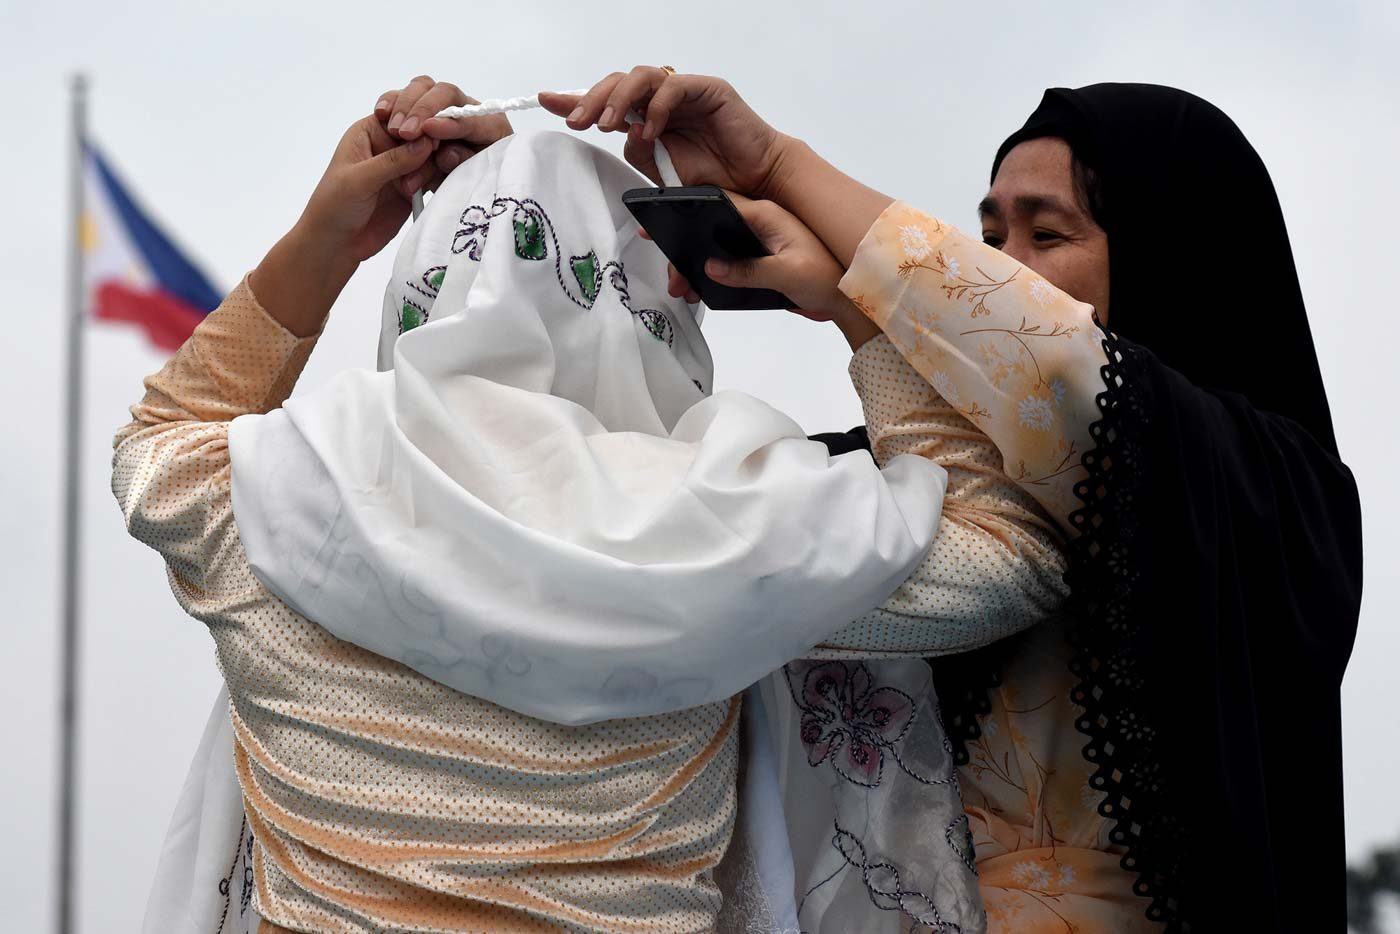 FIXING VEILS. A woman helps another fix her veil during the celebration of Eid'l Adha at the Quezon Memorial Circle on August 21, 2018. Photo by Angie de Silva/Rappler  